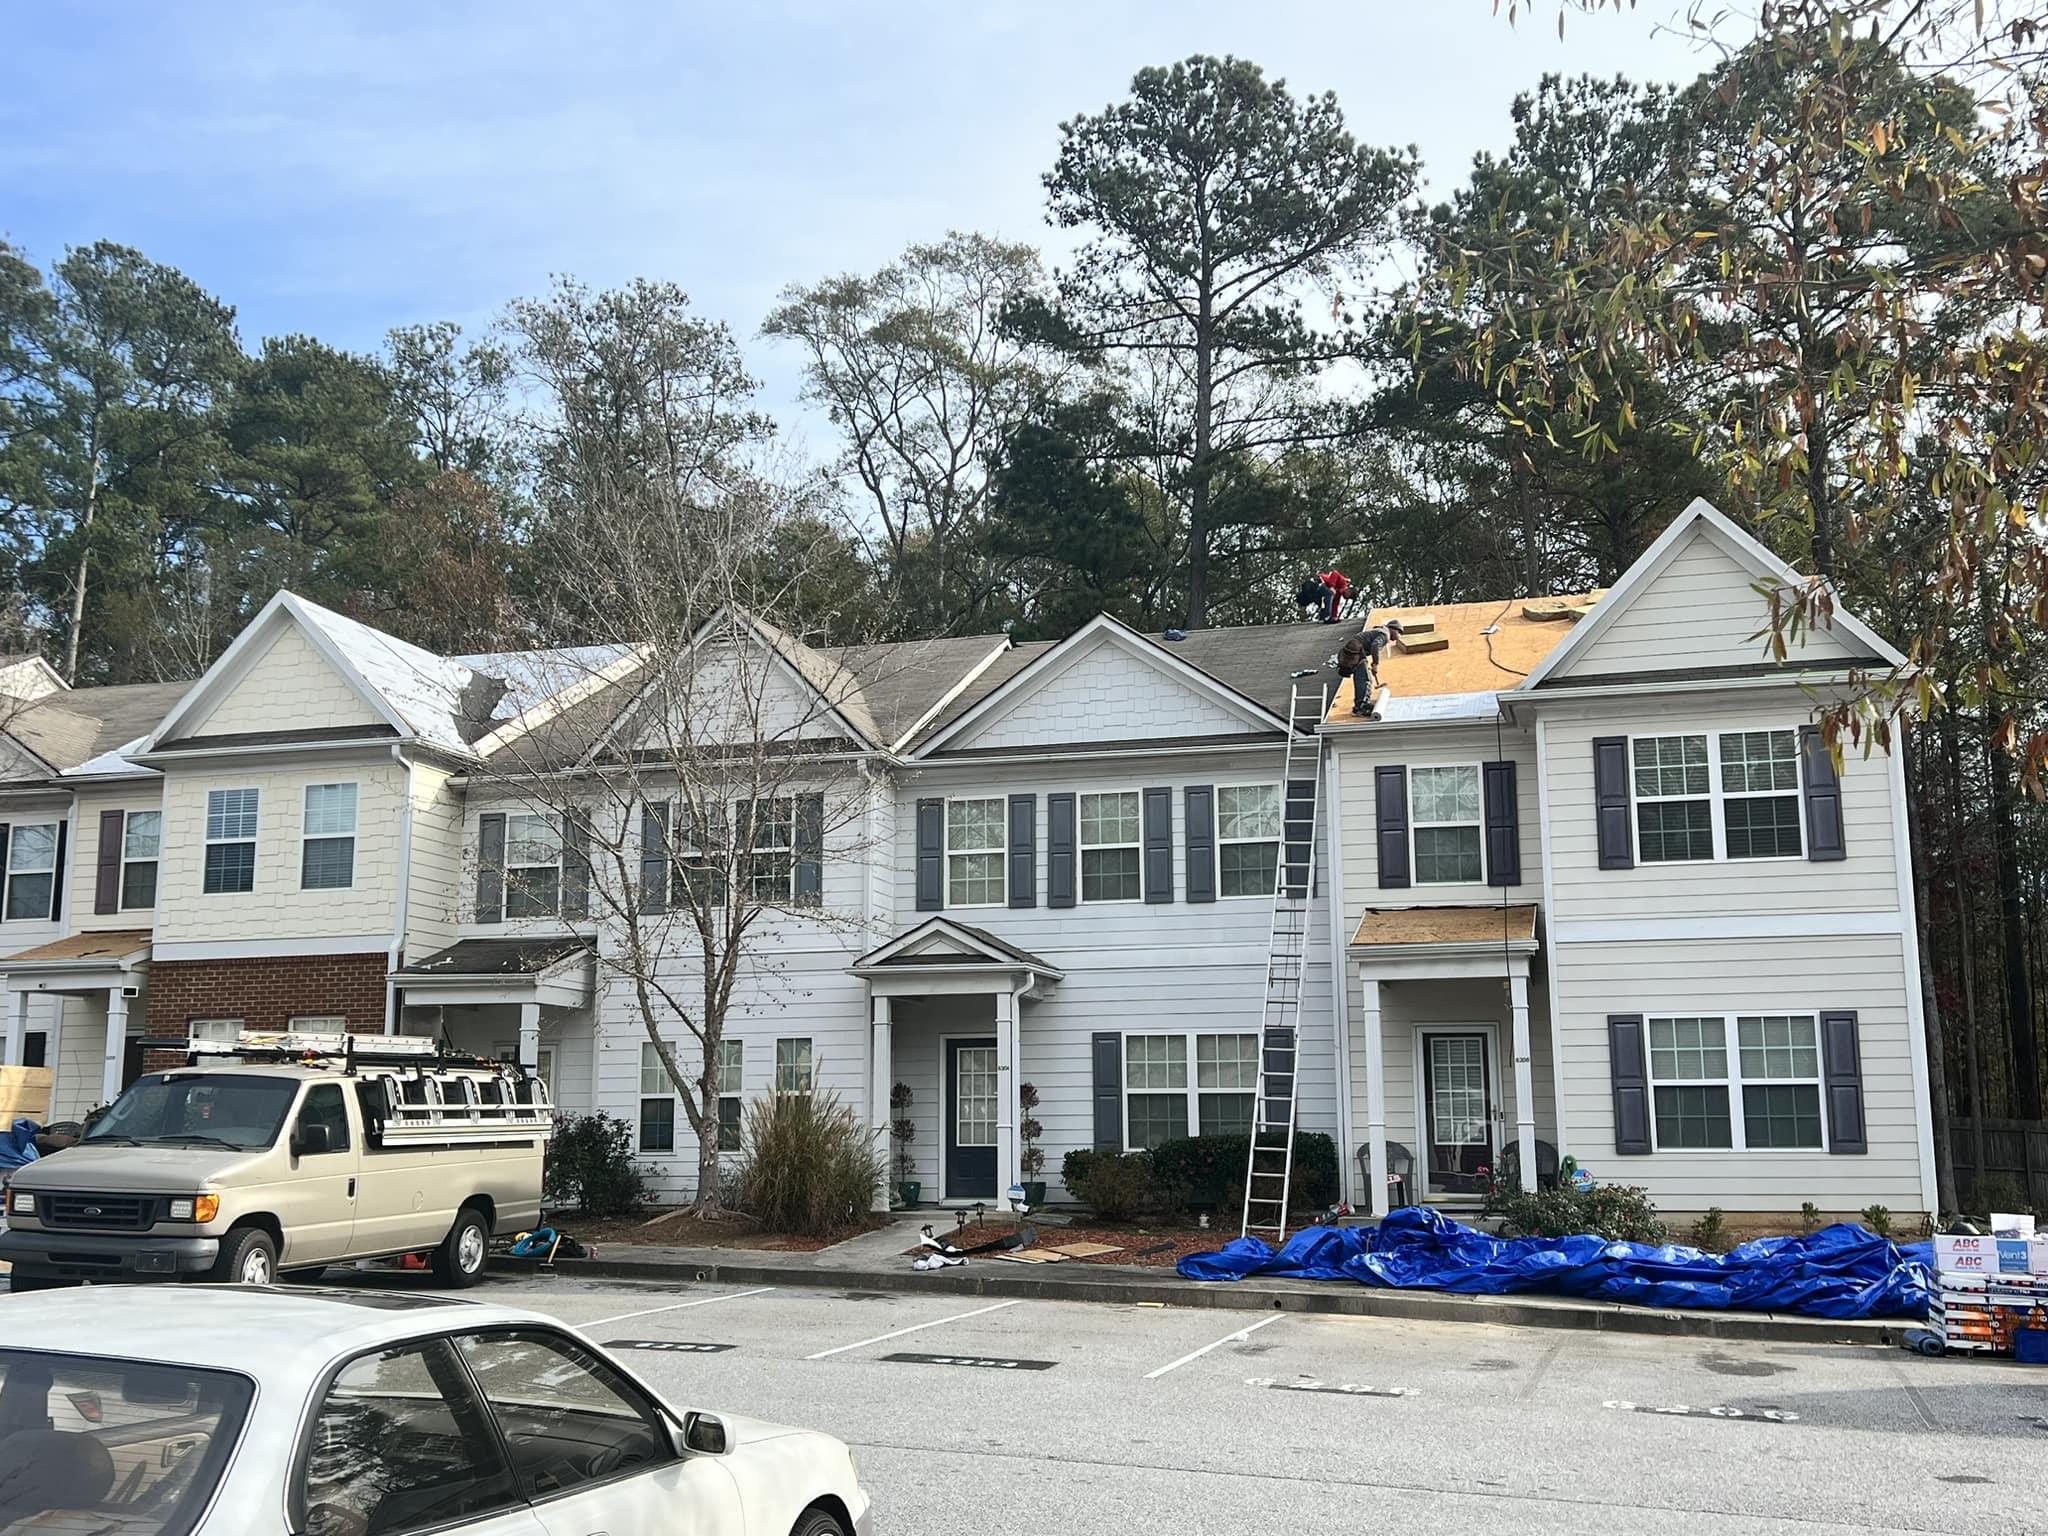 Expert Roofers Columbus Shares Insights on the Roofing Installation Process in Columbus, GA